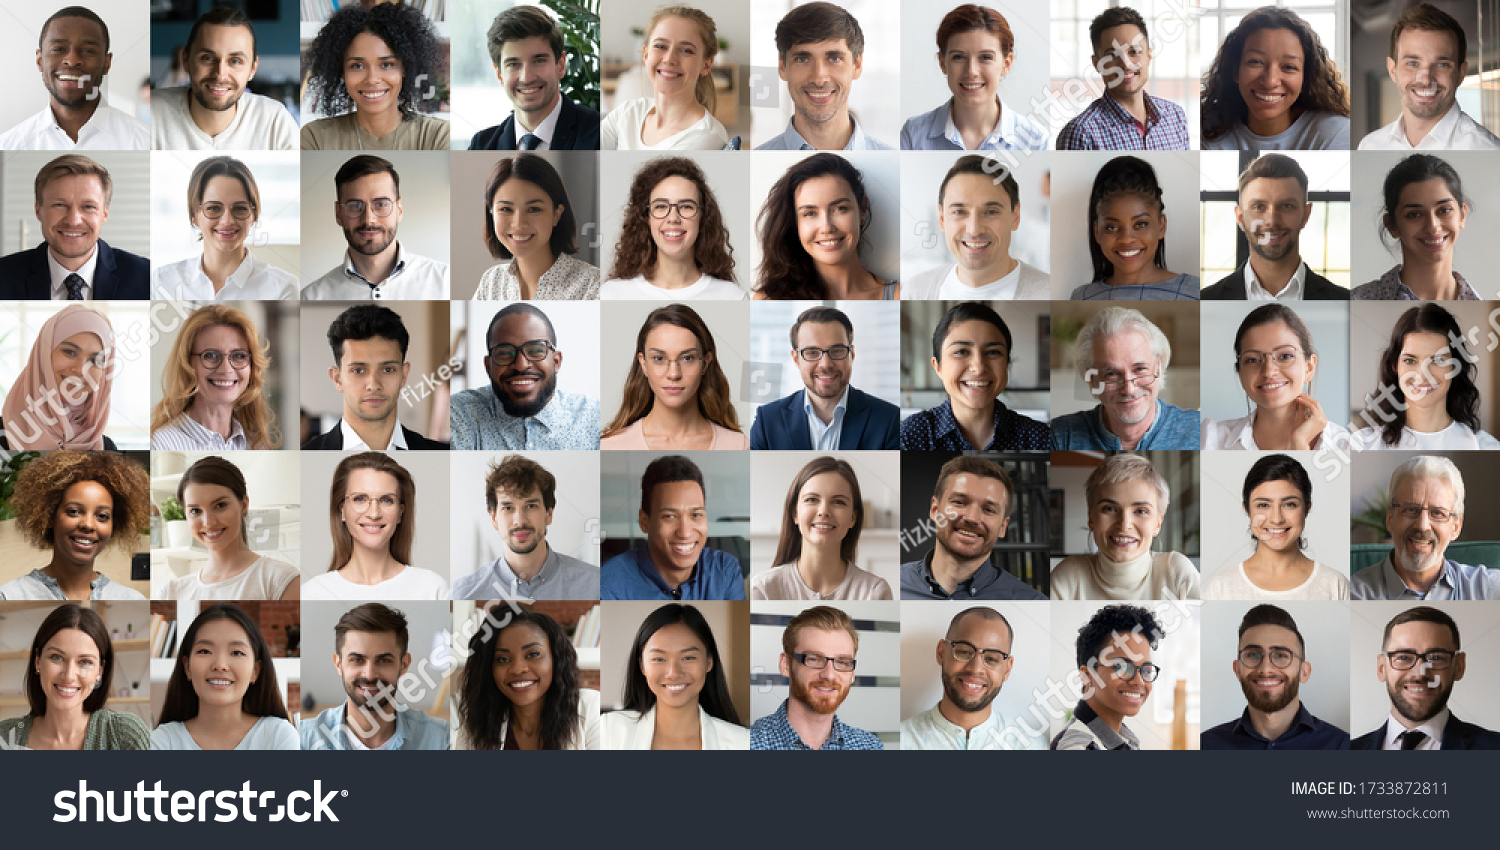 Many happy diverse ethnicity different young and old people group headshots in collage mosaic collection. Lot of smiling multicultural faces looking at camera. Human resource society database concept. #1733872811